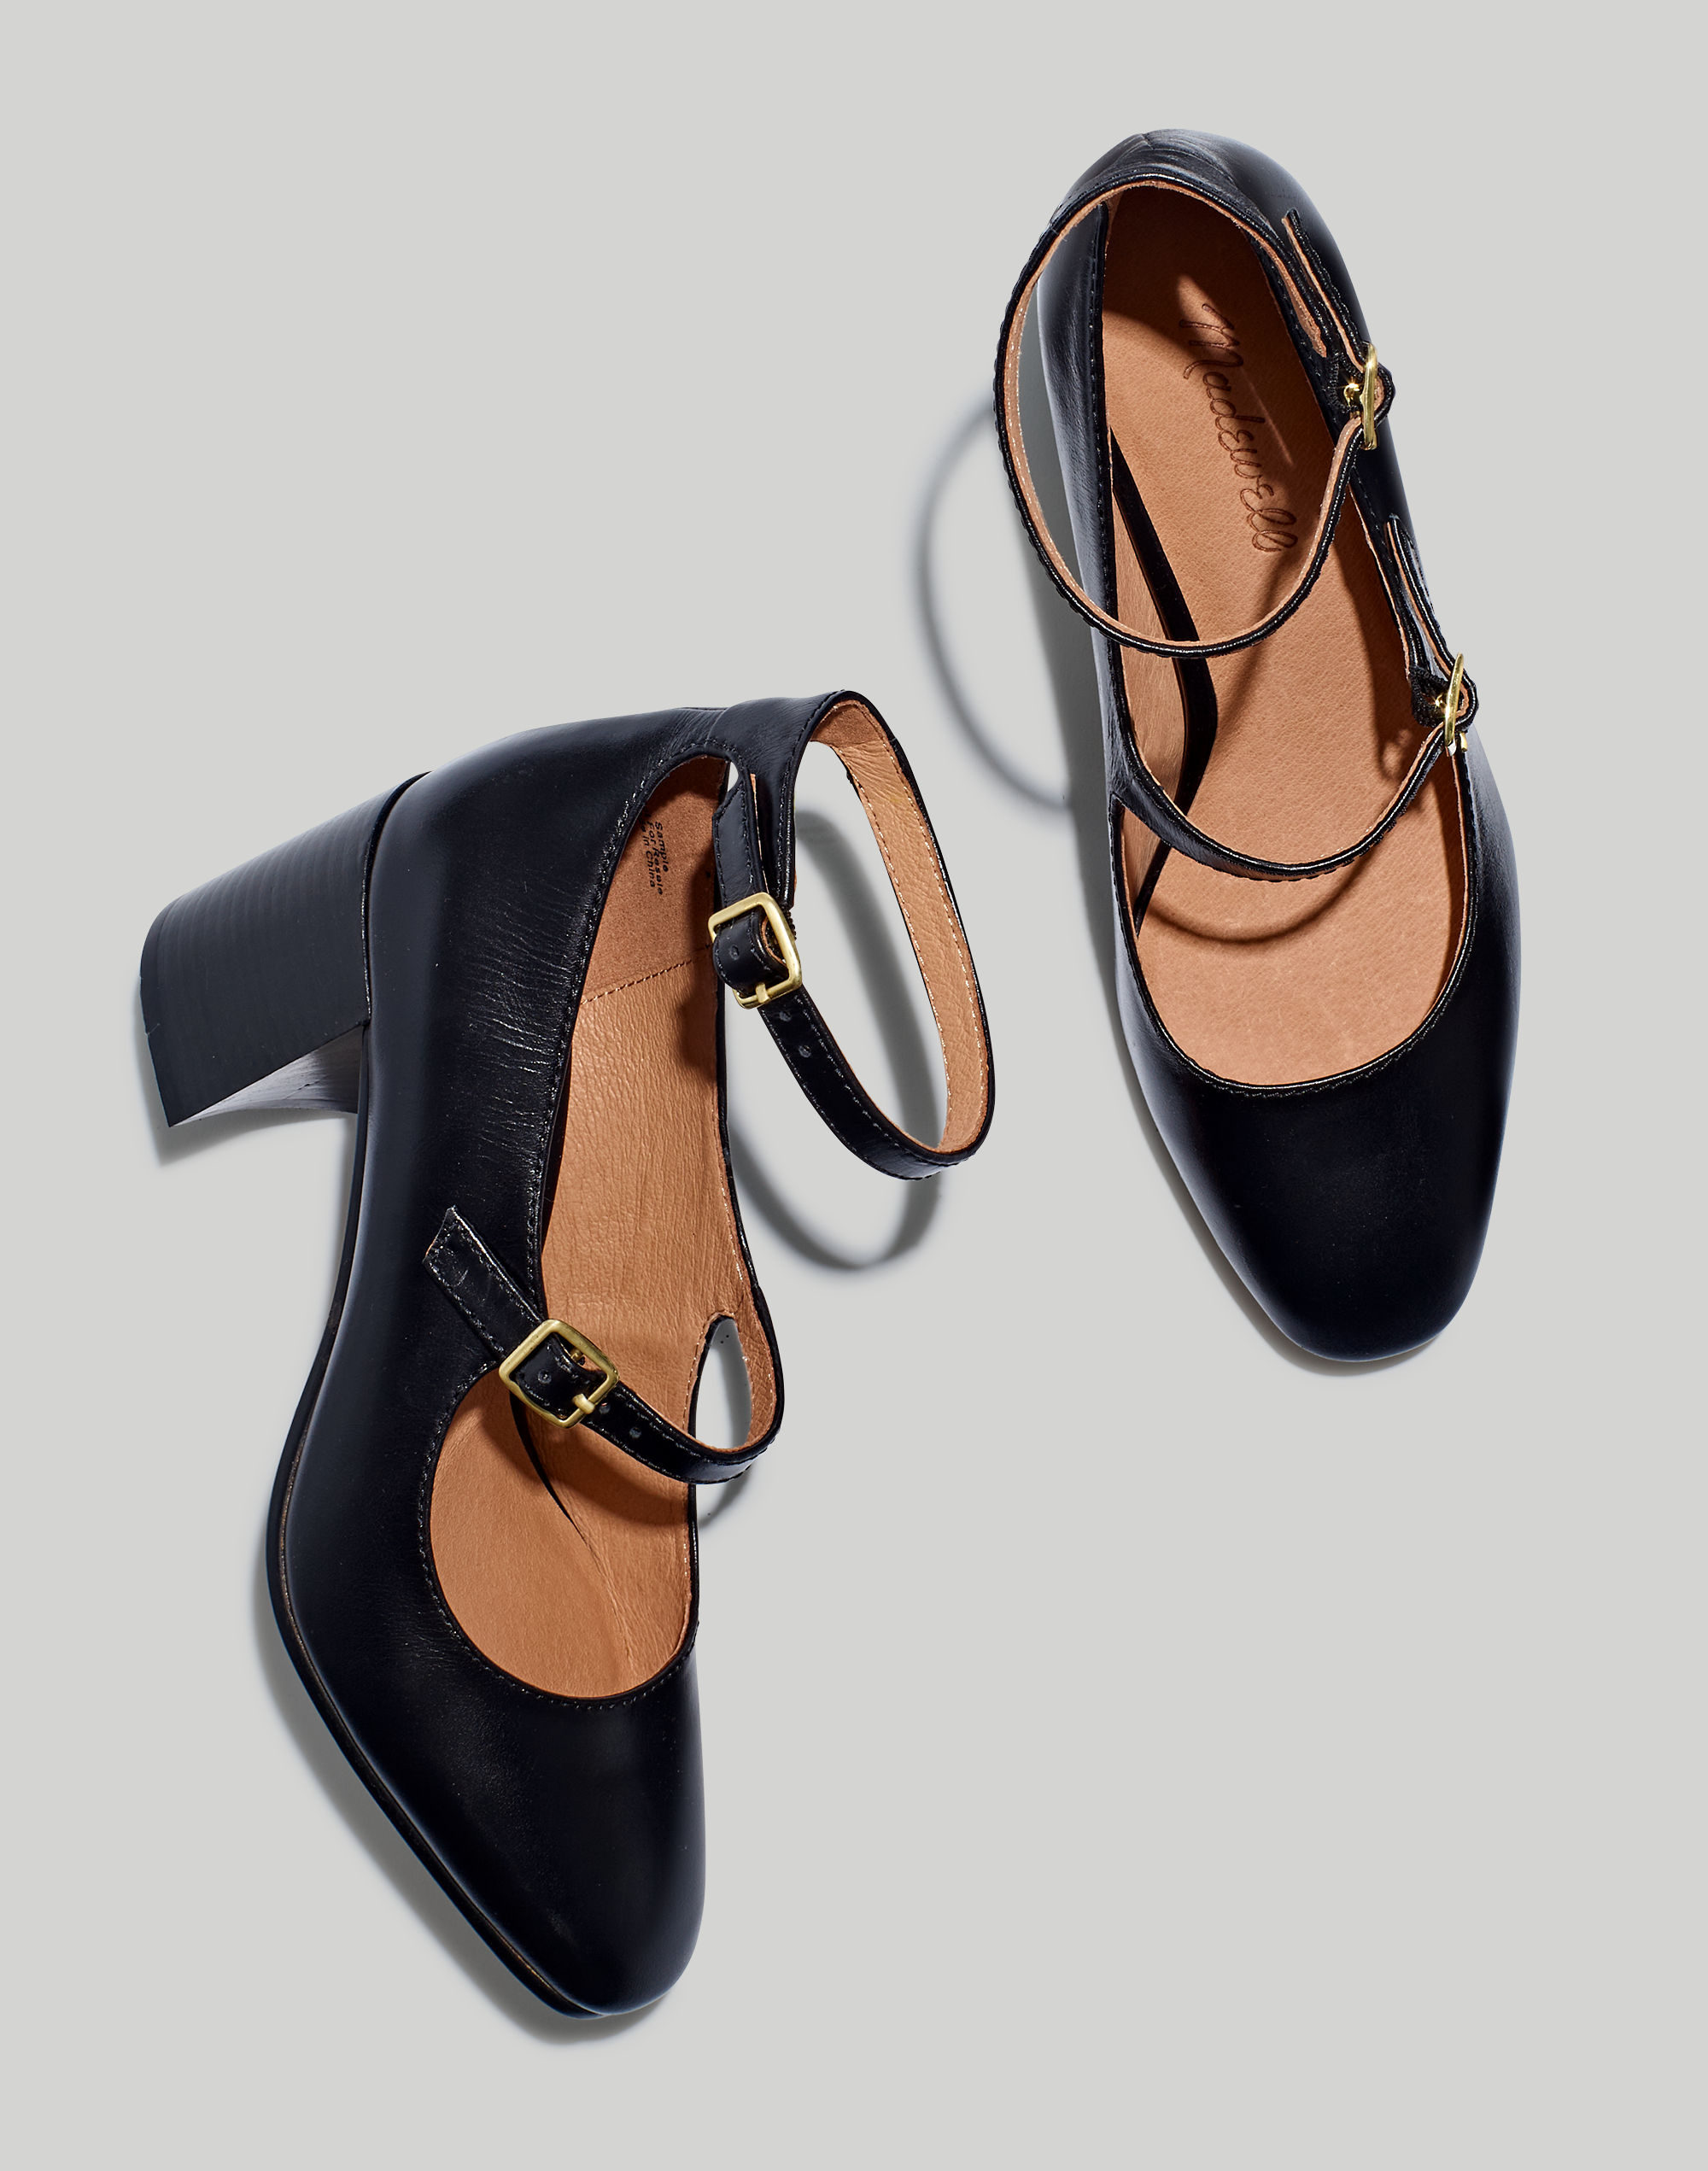 The Maddie Heeled Mary Jane in Leather